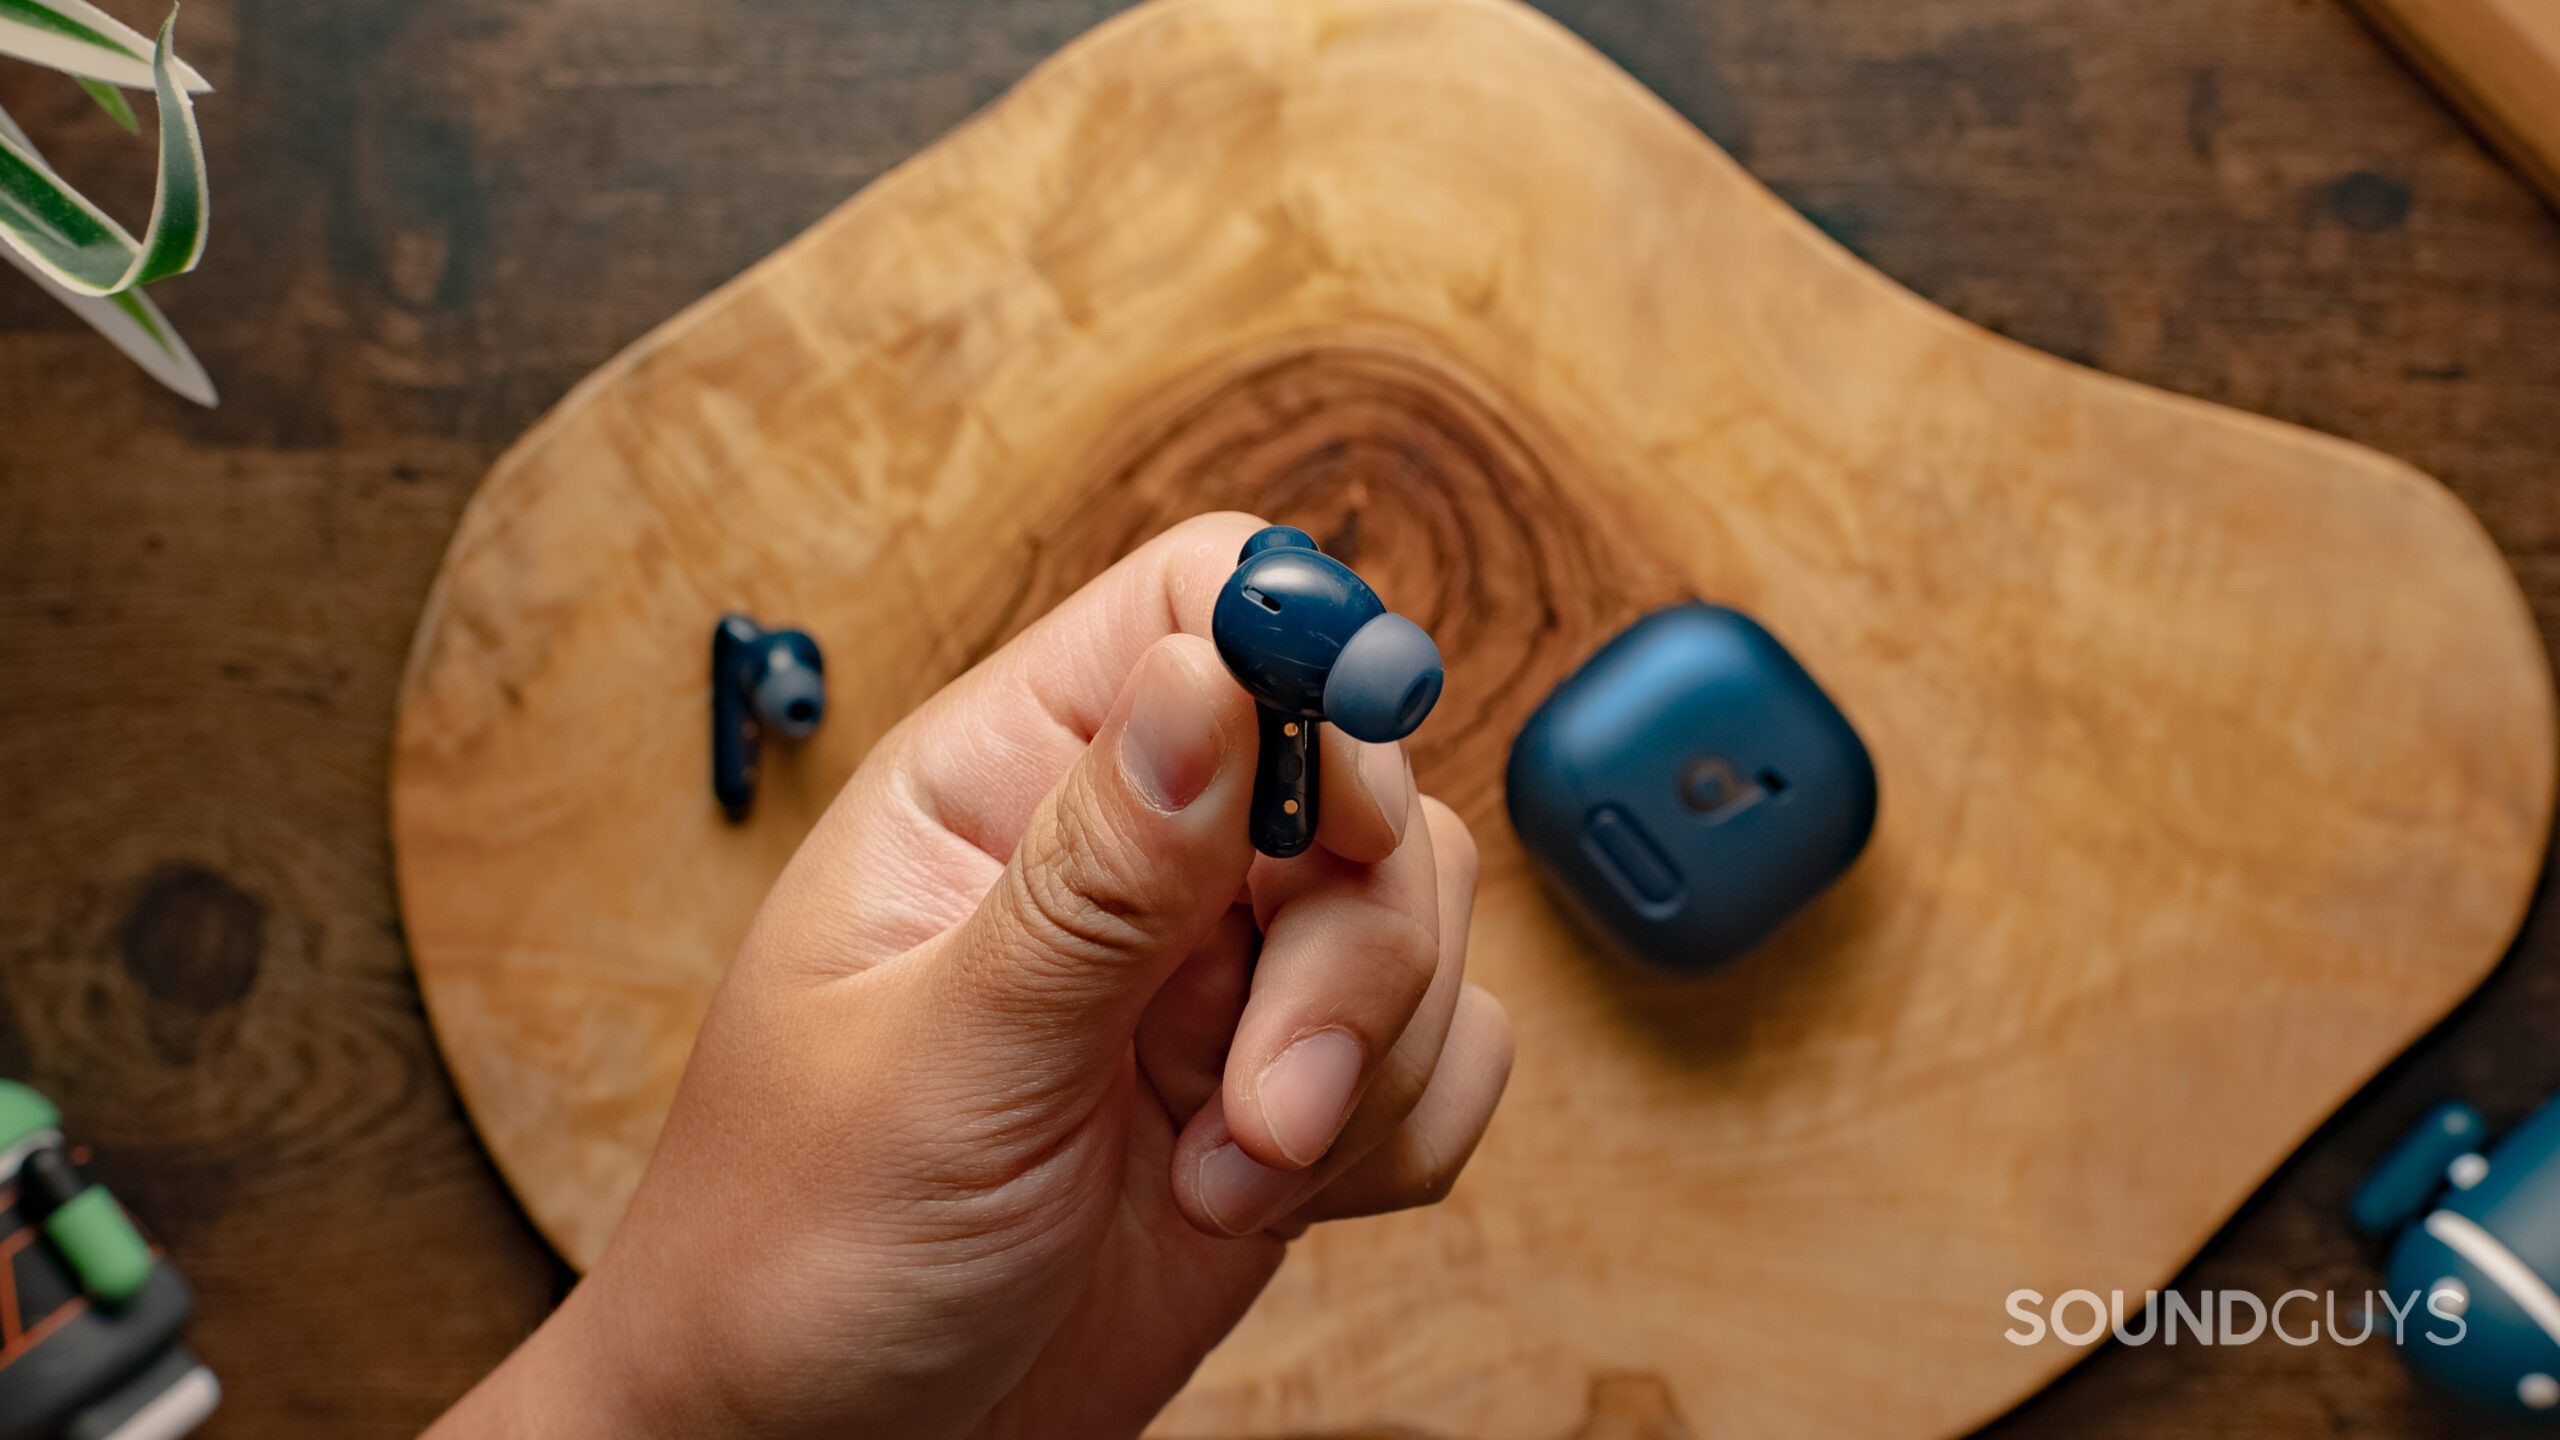 Anker intros new noise-canceling earbuds, the Soundcore Liberty 4 NC -  PhoneArena